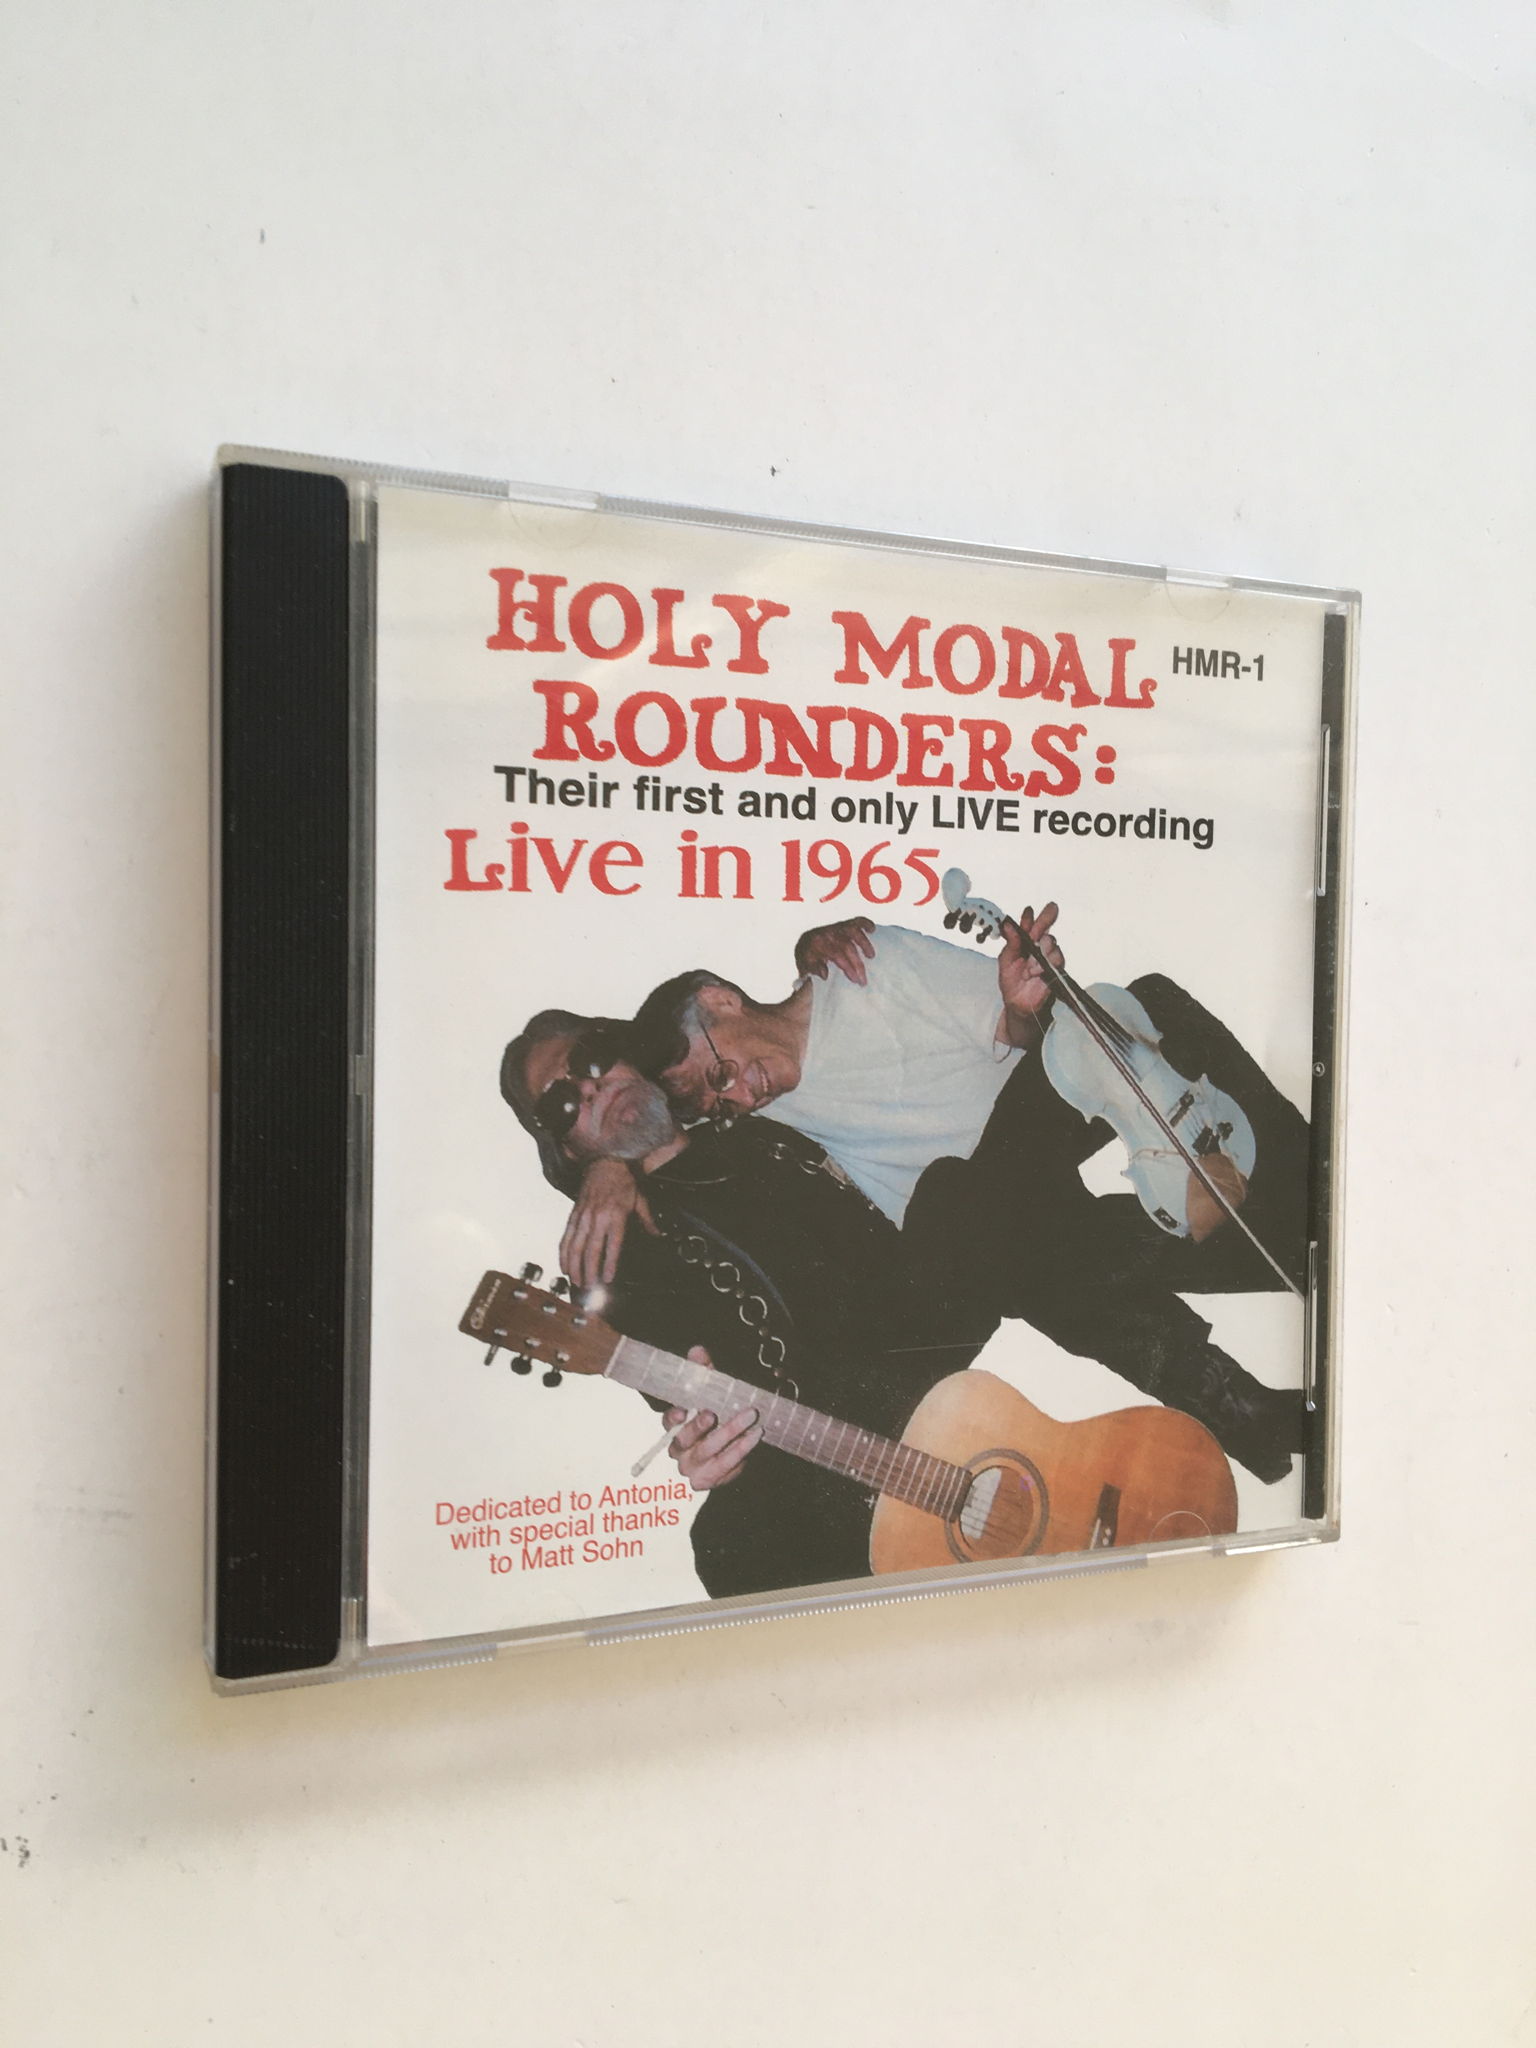 Holy Modal Rounders live in 1965 cd Their ... For Sale | Audiogon